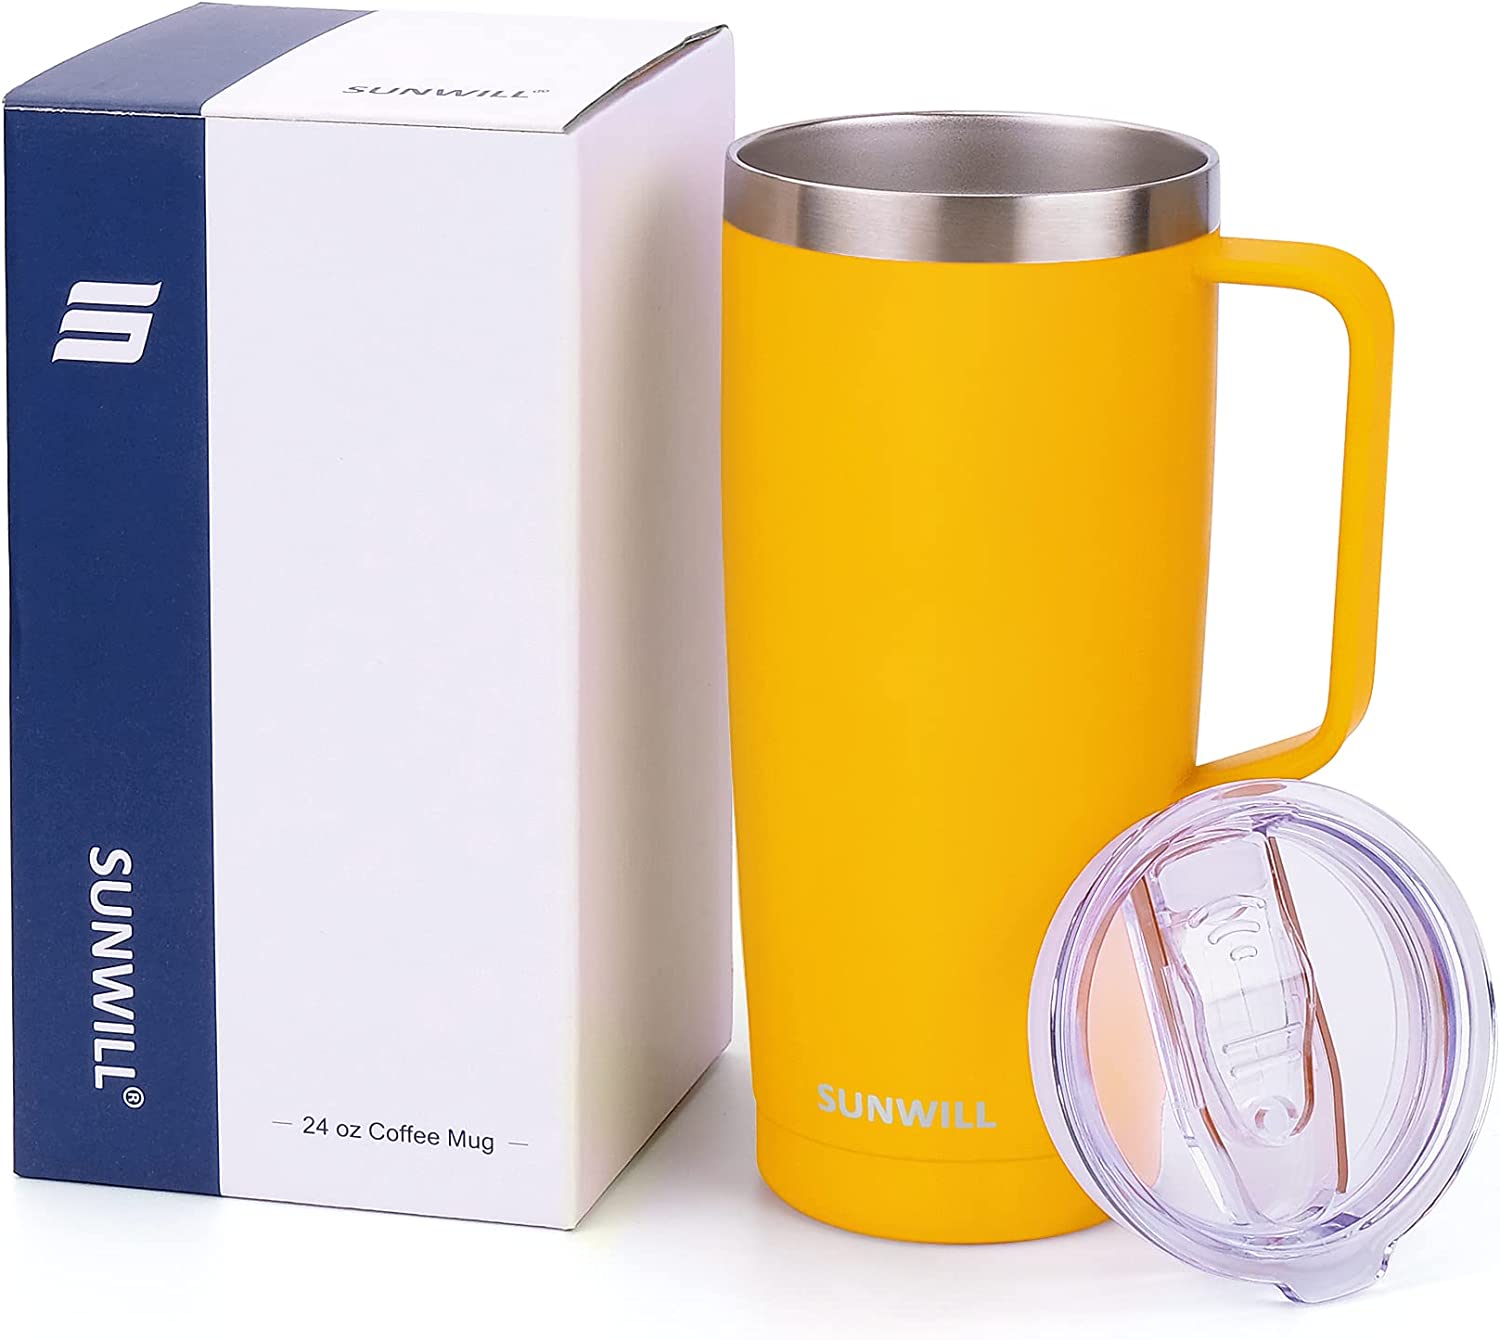  SUNWILL 14 oz Coffee Mug, Vacuum Insulated Camping Mug with  Lid, Double Wall Stainless Steel Travel Tumbler Cup, Coffee Thermos  Outdoor, Powder Coated Navy Blue : Home & Kitchen